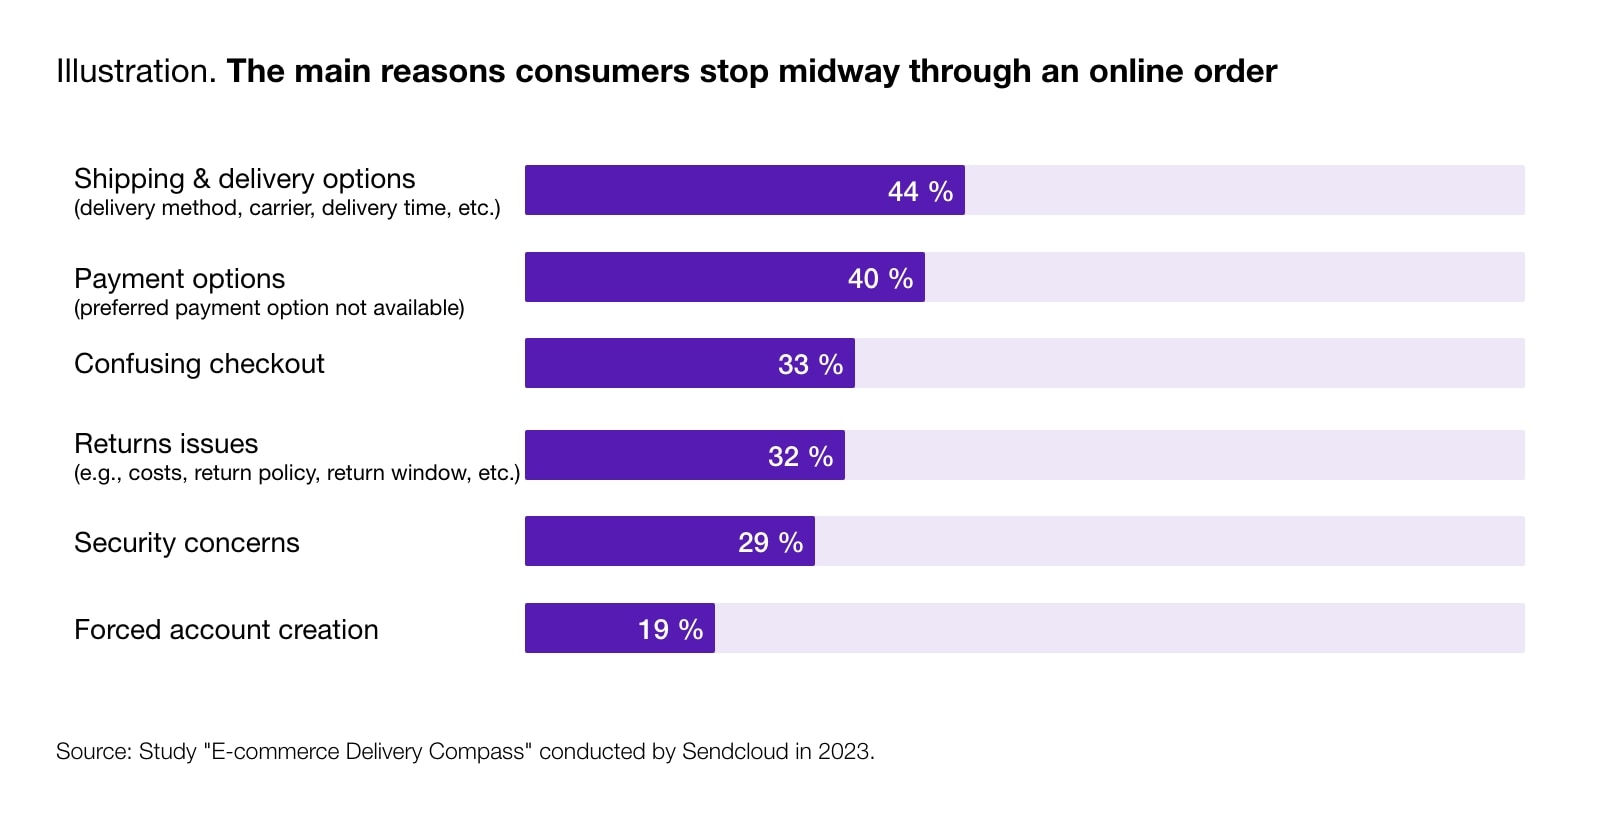 Diagram showing the main reasons consumers stop midway through an online order.